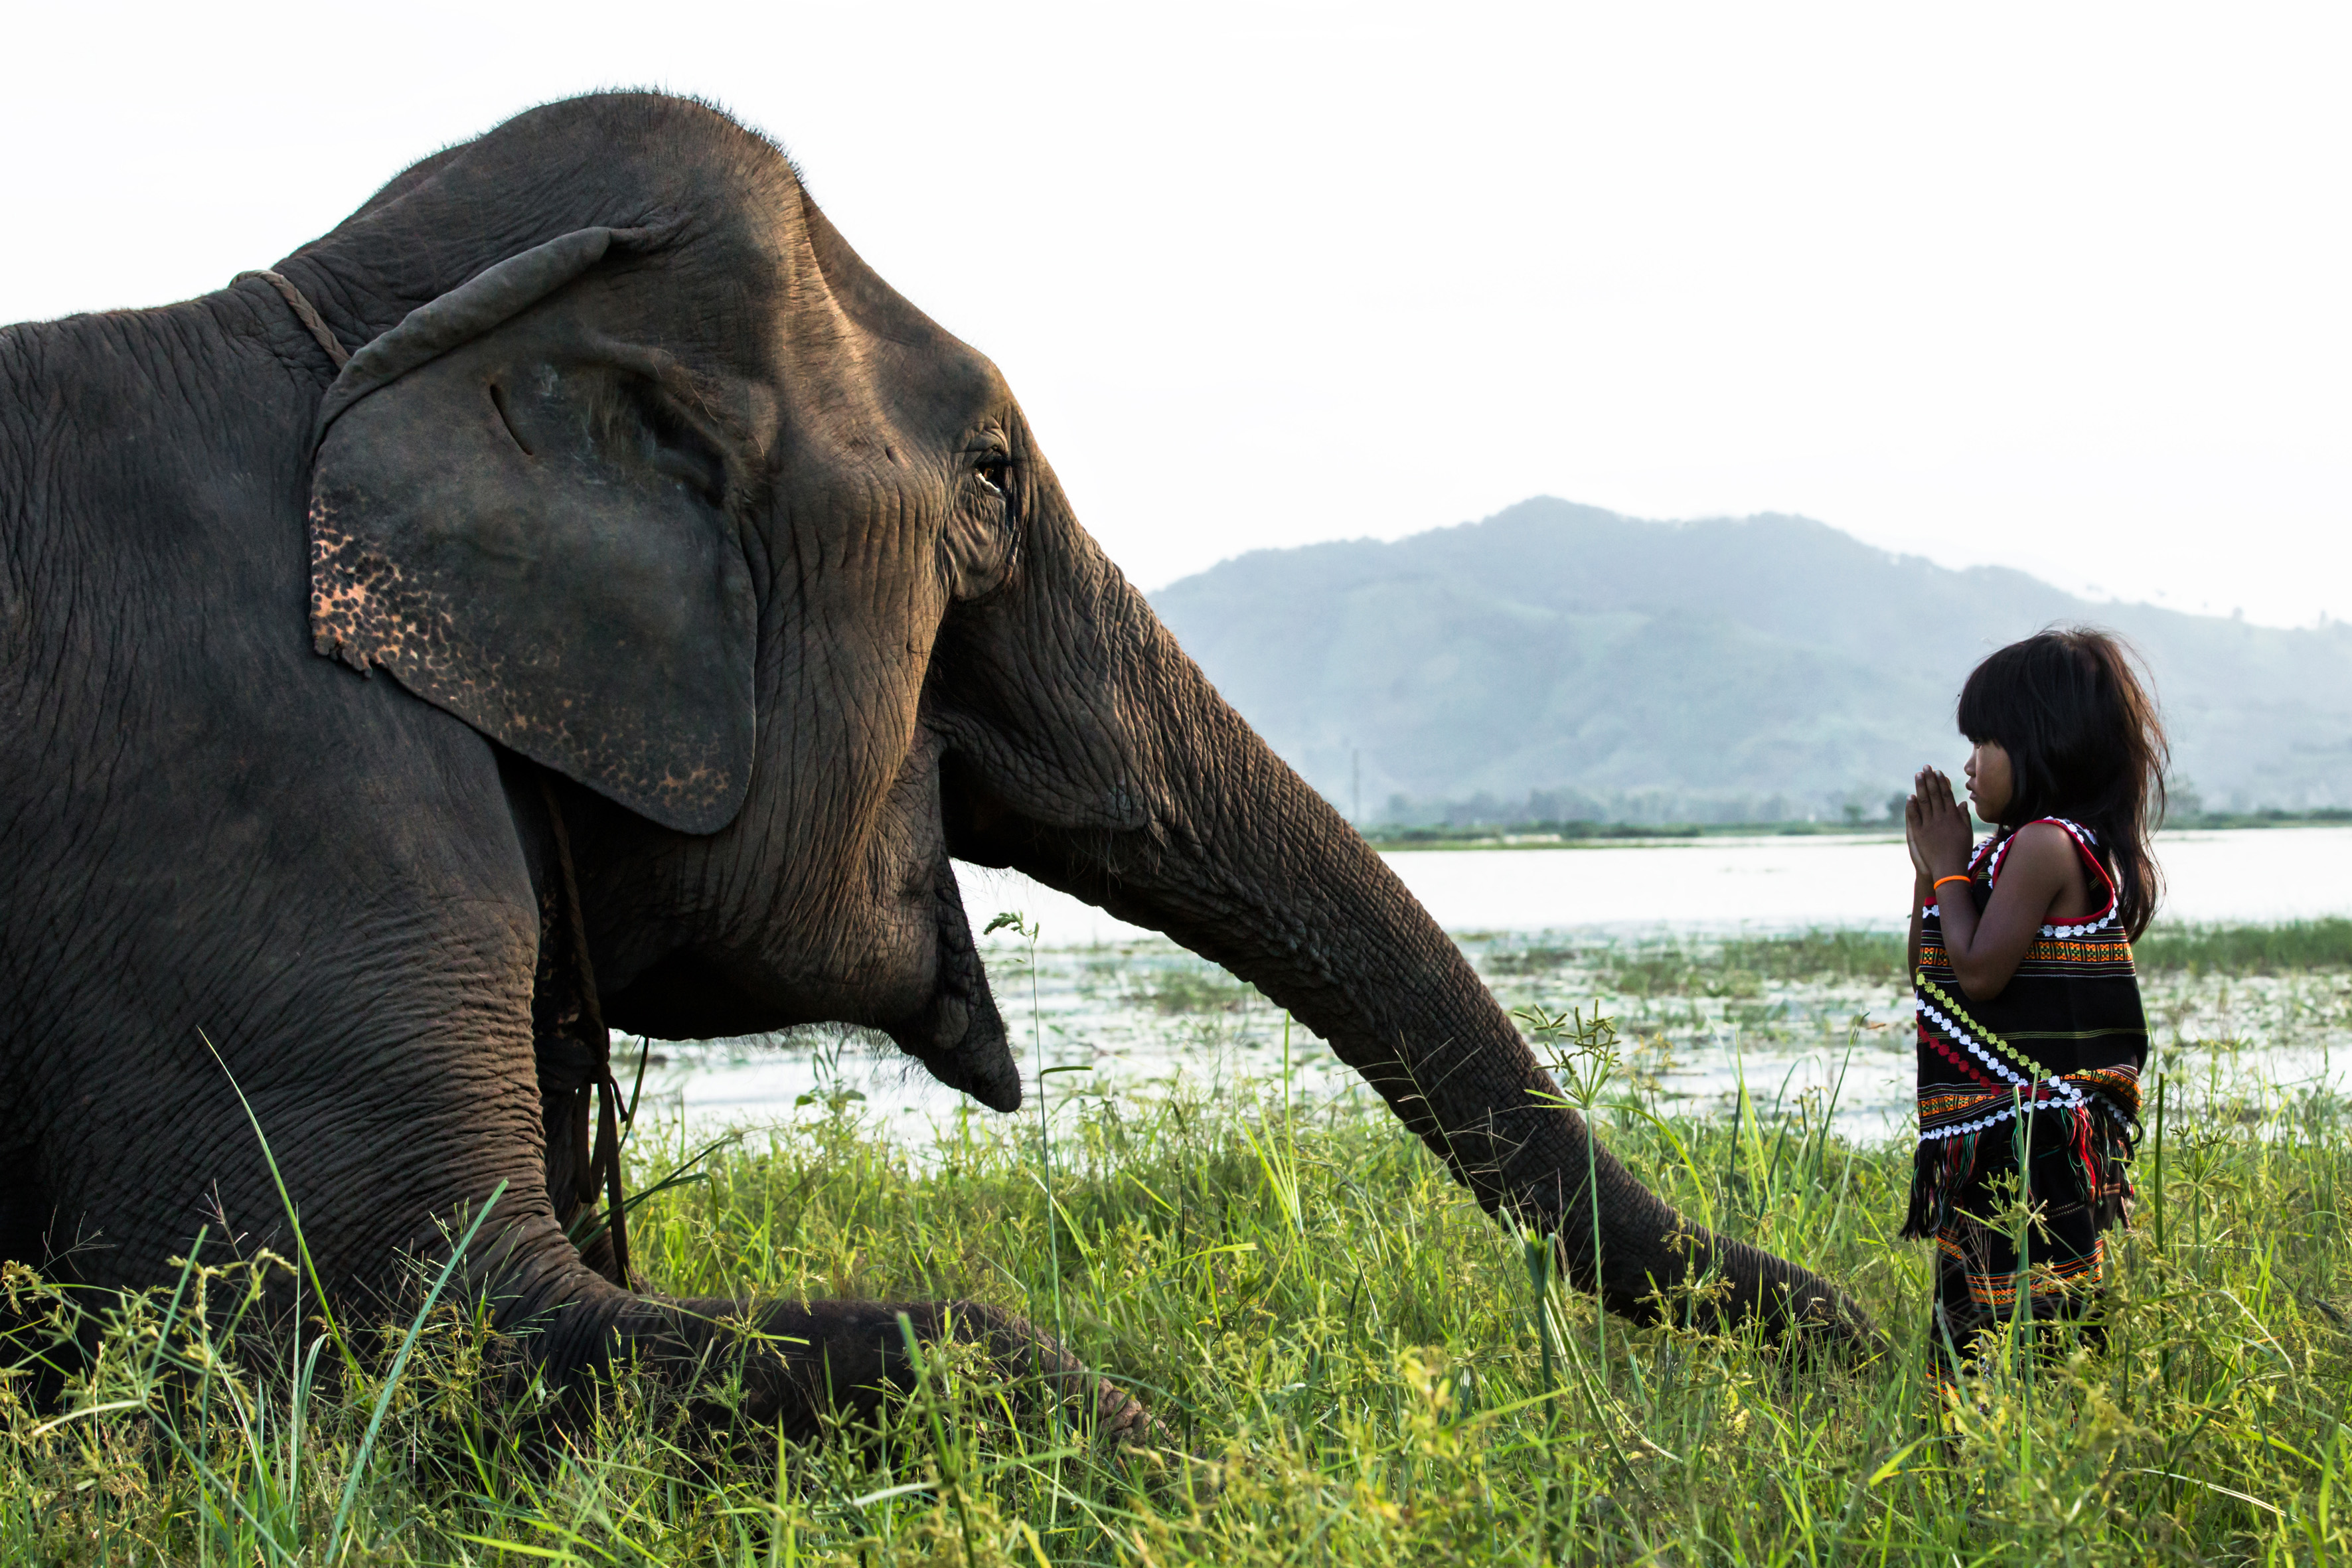 The elephant whisperer: Meet the young girl who has a jumbo-sized ...